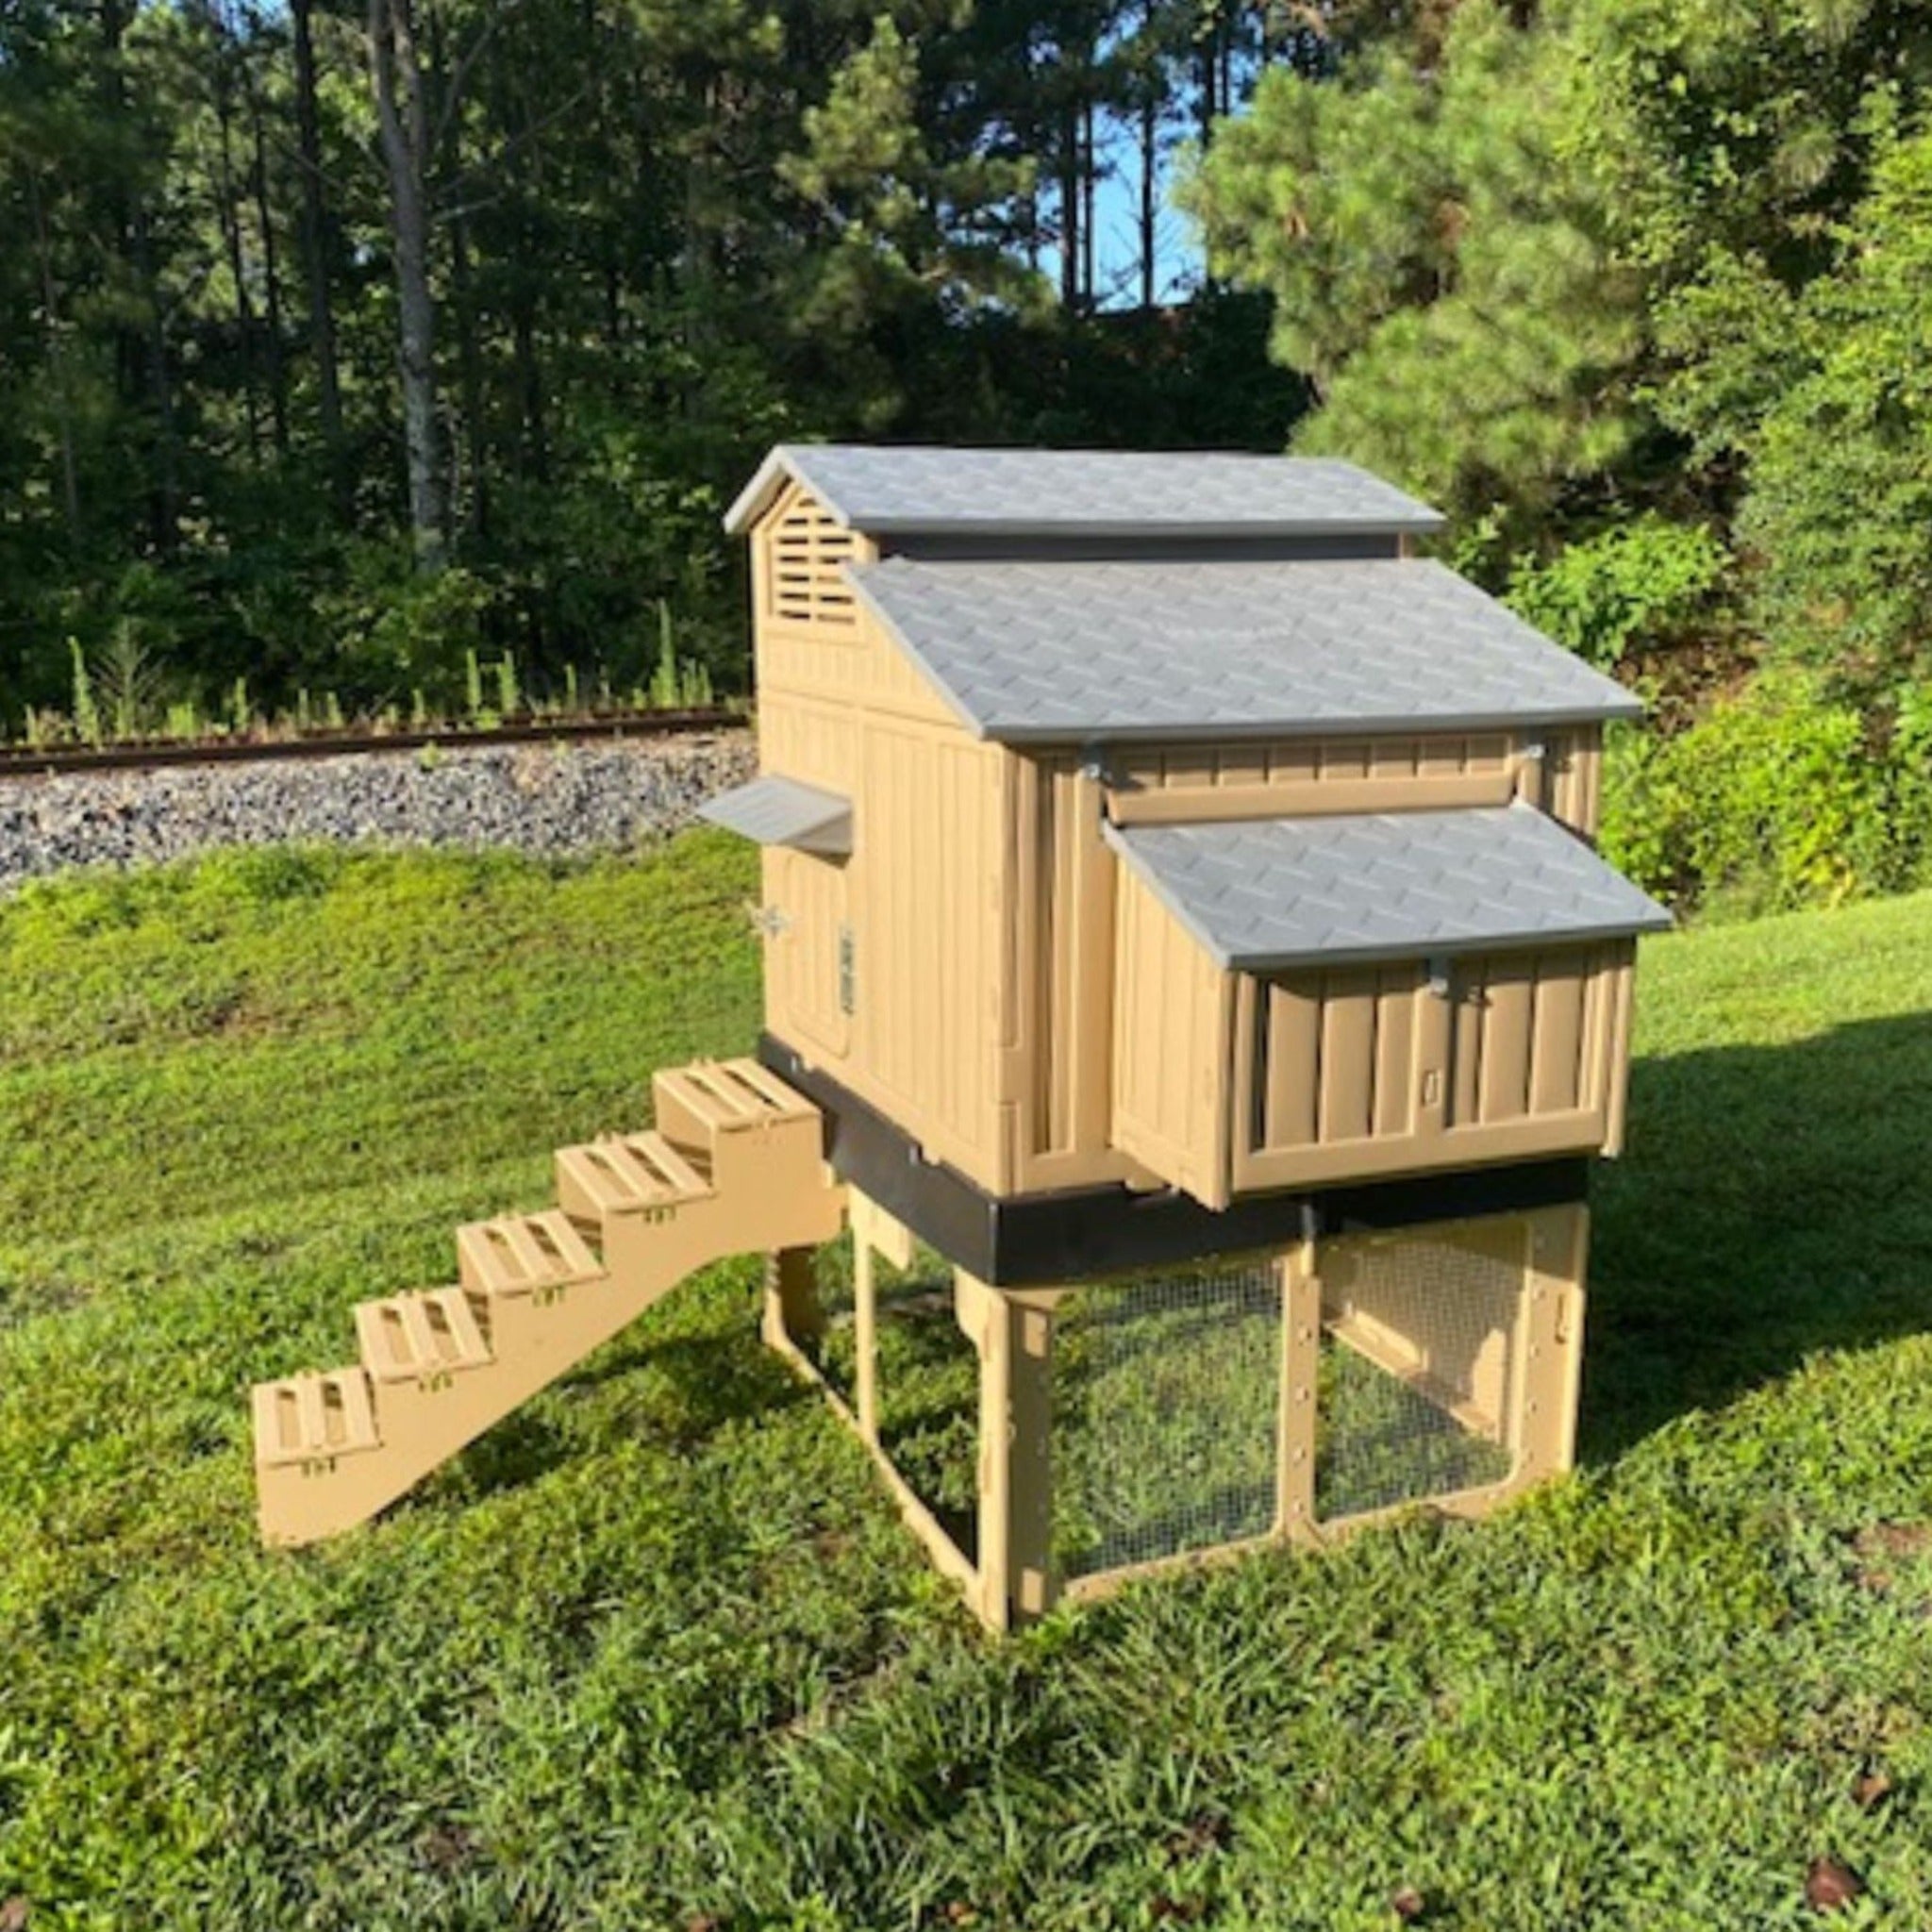 Hatching Time. Large Formex chicken coop with stand and stairs bundle. Fully built view with chicken wire